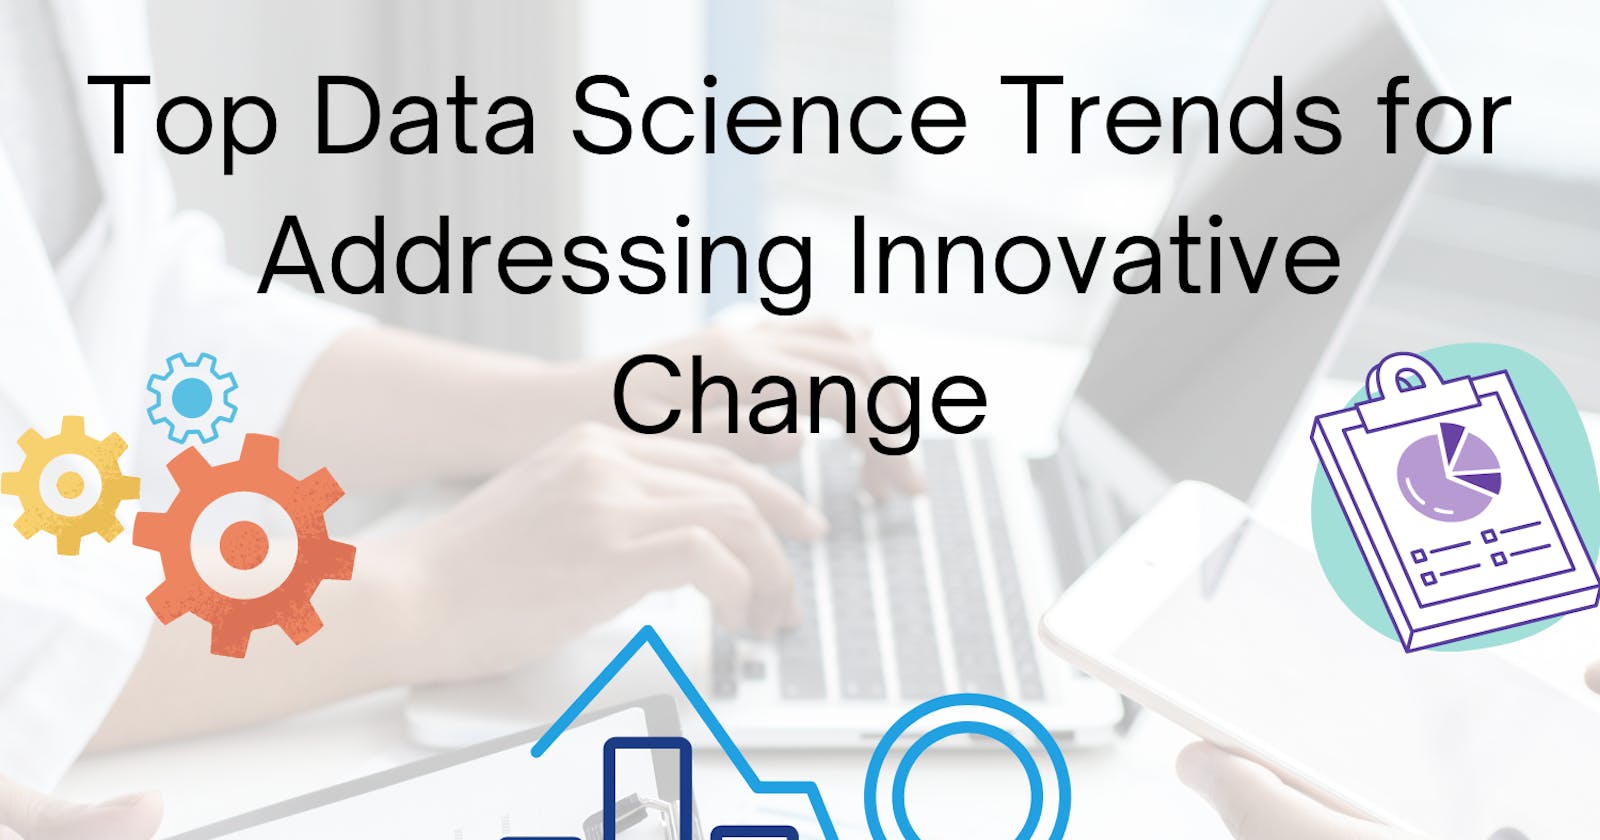 Top Data Science Trends for Addressing Innovative Change